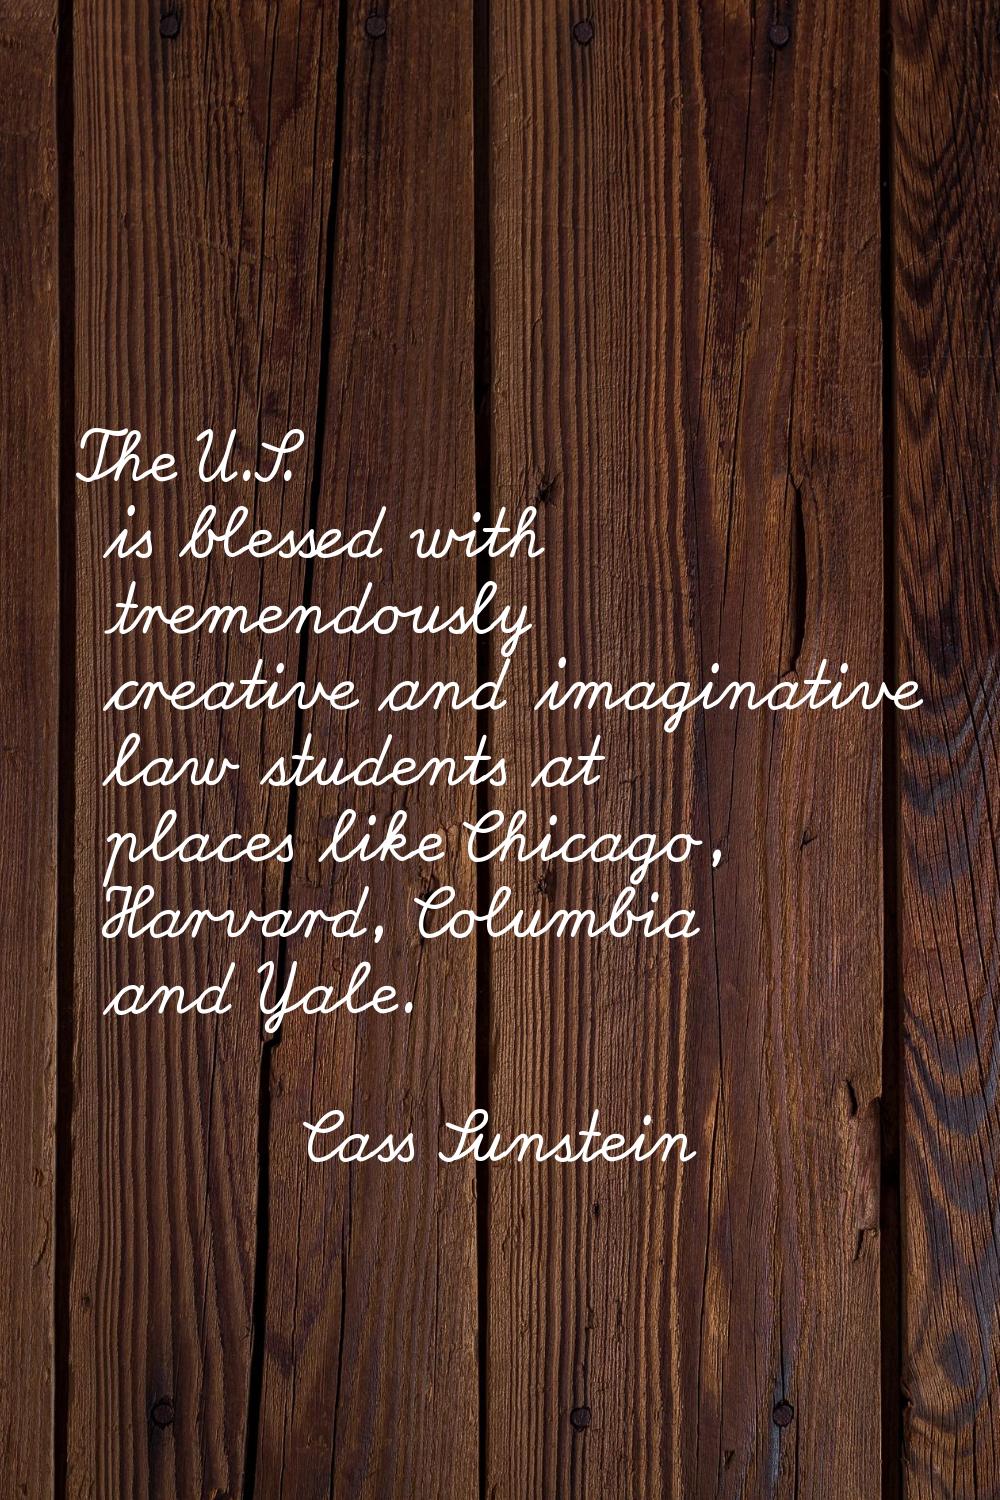 The U.S. is blessed with tremendously creative and imaginative law students at places like Chicago,